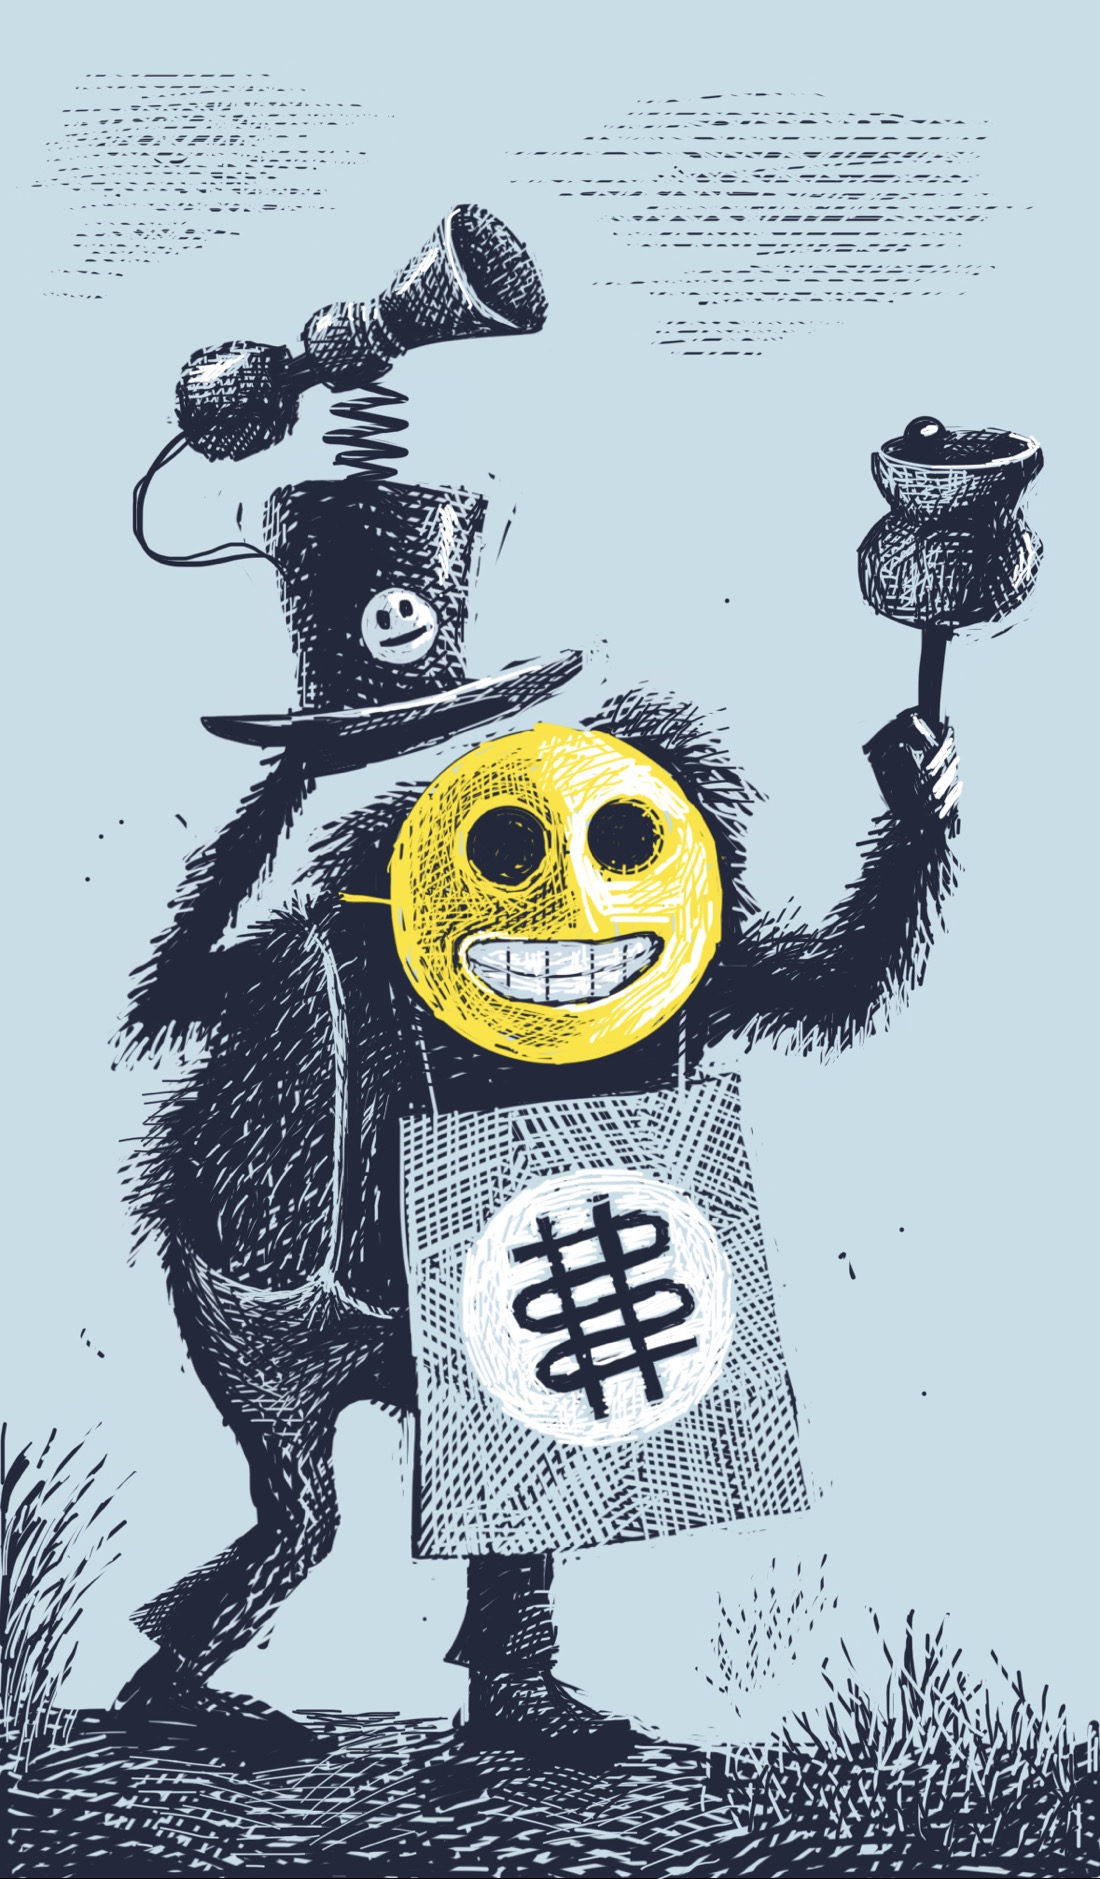 A furry, slightly disheveled creature, wearing suspenders and a sandwich board with an icon on it that looks like a vague blend of the bitcoin symbol and a dollar sign. The creature's face is covered by a sinister smiley-face mask with perfect teeth and empty eyes. The creature is doffing a top hat with a clown horn affixed to it via a spring, and also ringing a bell, like a carnival barker. The creature is slightly hunched, trudging along a barren landscape with sparse grass. This is totally not a passive-aggressive reference to the crypto scammers who have been making a particular nuisance of themselves lately.